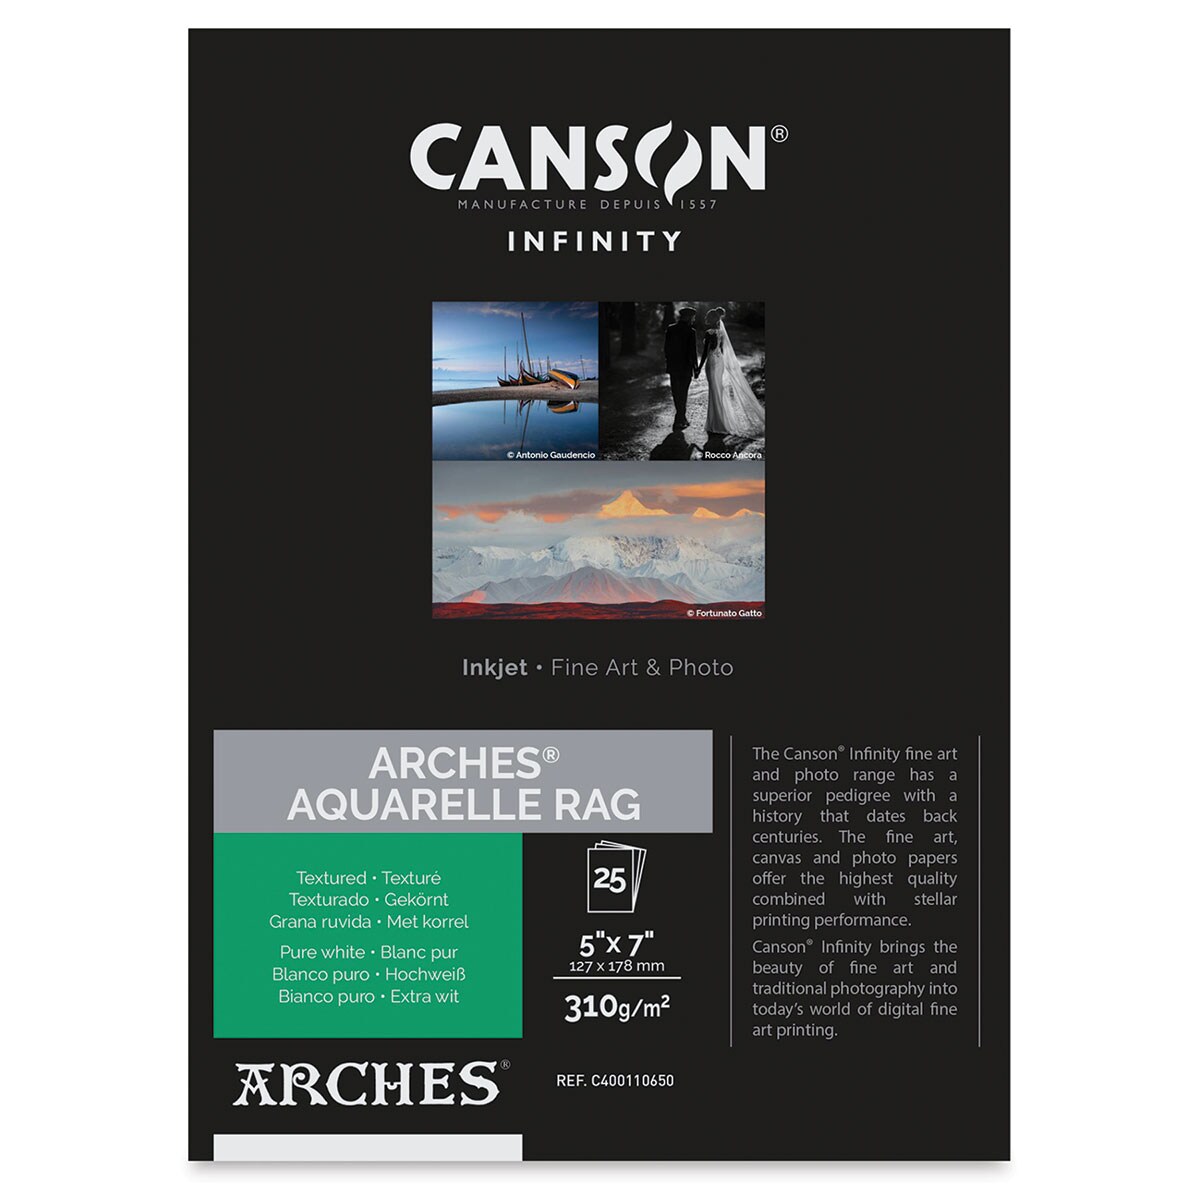 Canson Infinity Arches Aquarelle Rag Inkjet Paper - 5&#x22; x 7&#x22;, 310 gsm, Package of 25